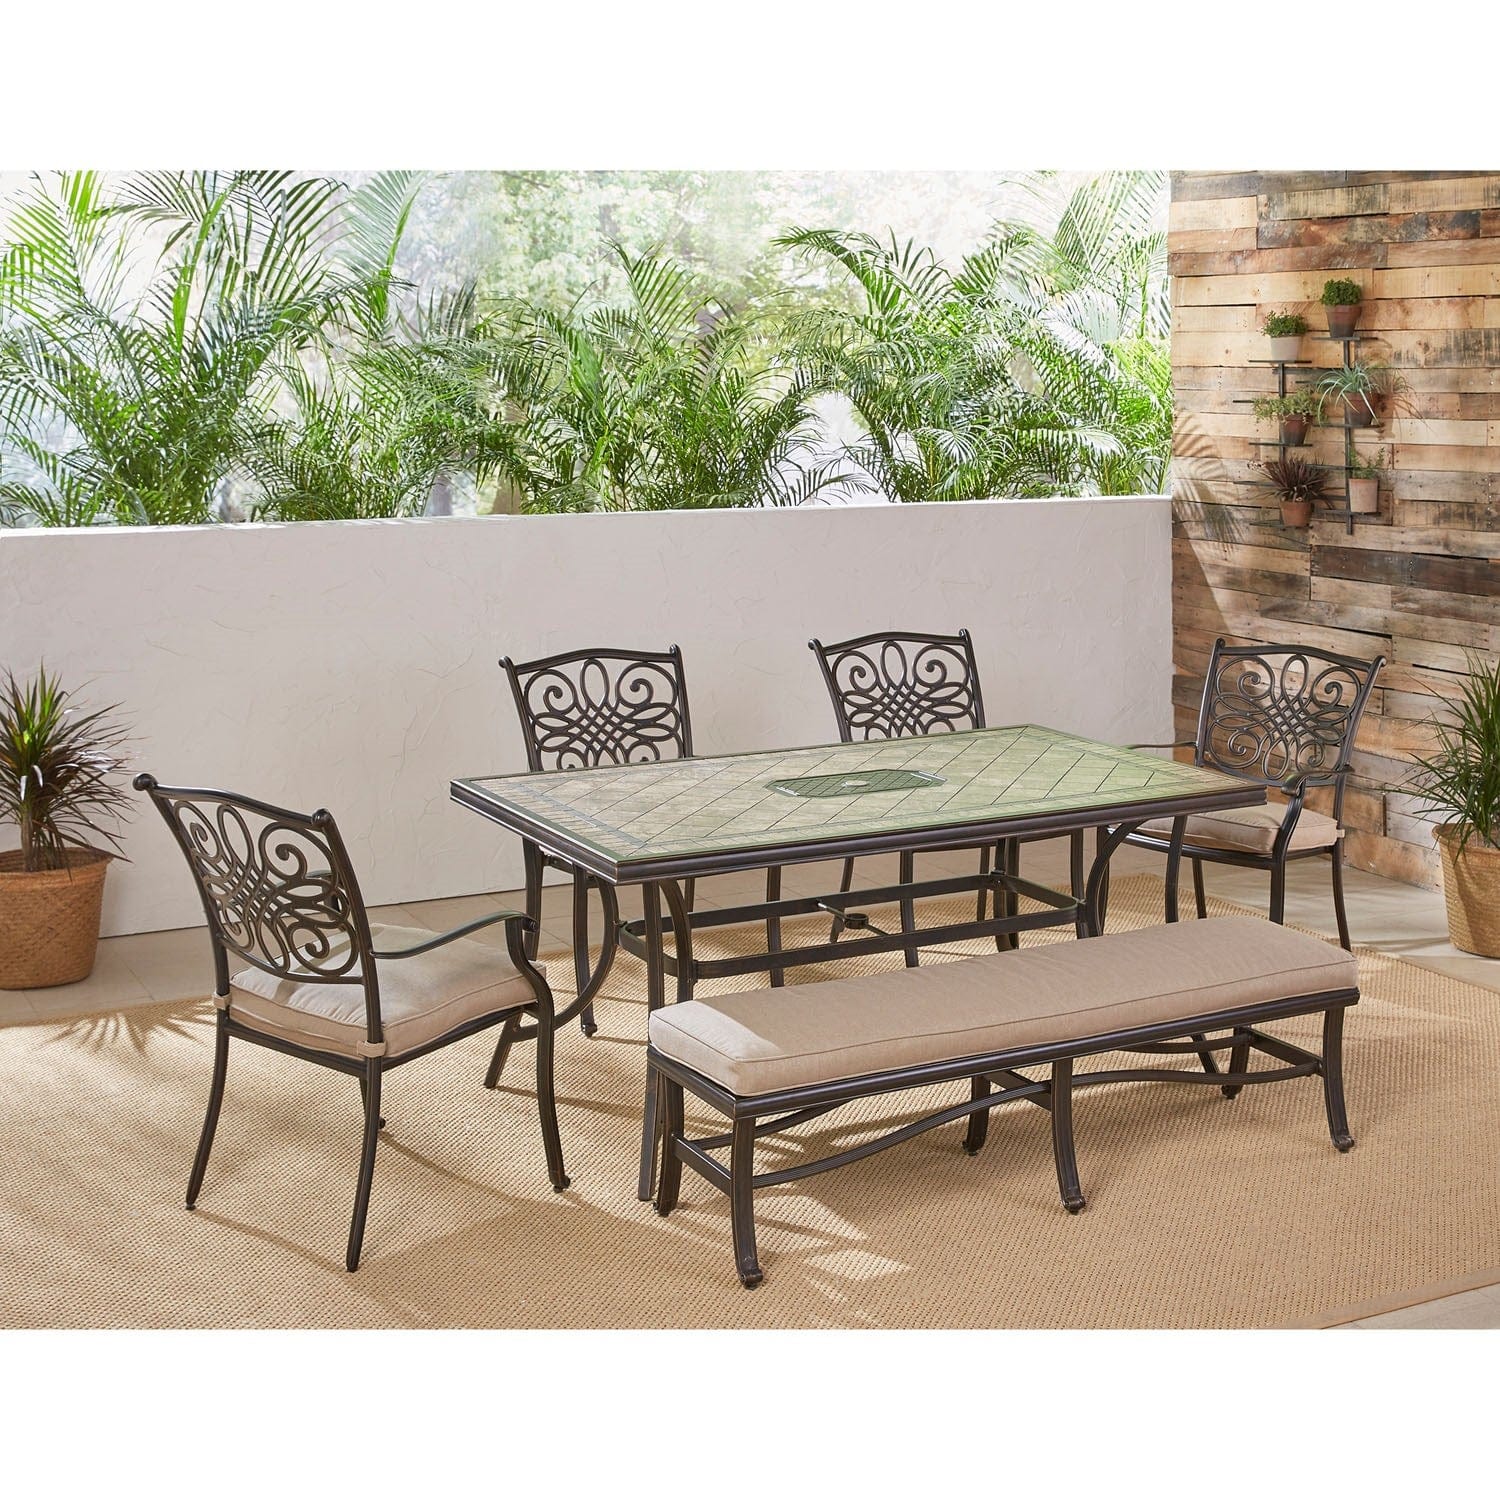 Hanover Outdoor Dining Set Hanover - Monaco 6-Piece Dining Set in Tan with Four Dining Chairs, a Cushioned Bench, and a 40" x 68" Tile-Top Table | MONDN6PCBN-TAN